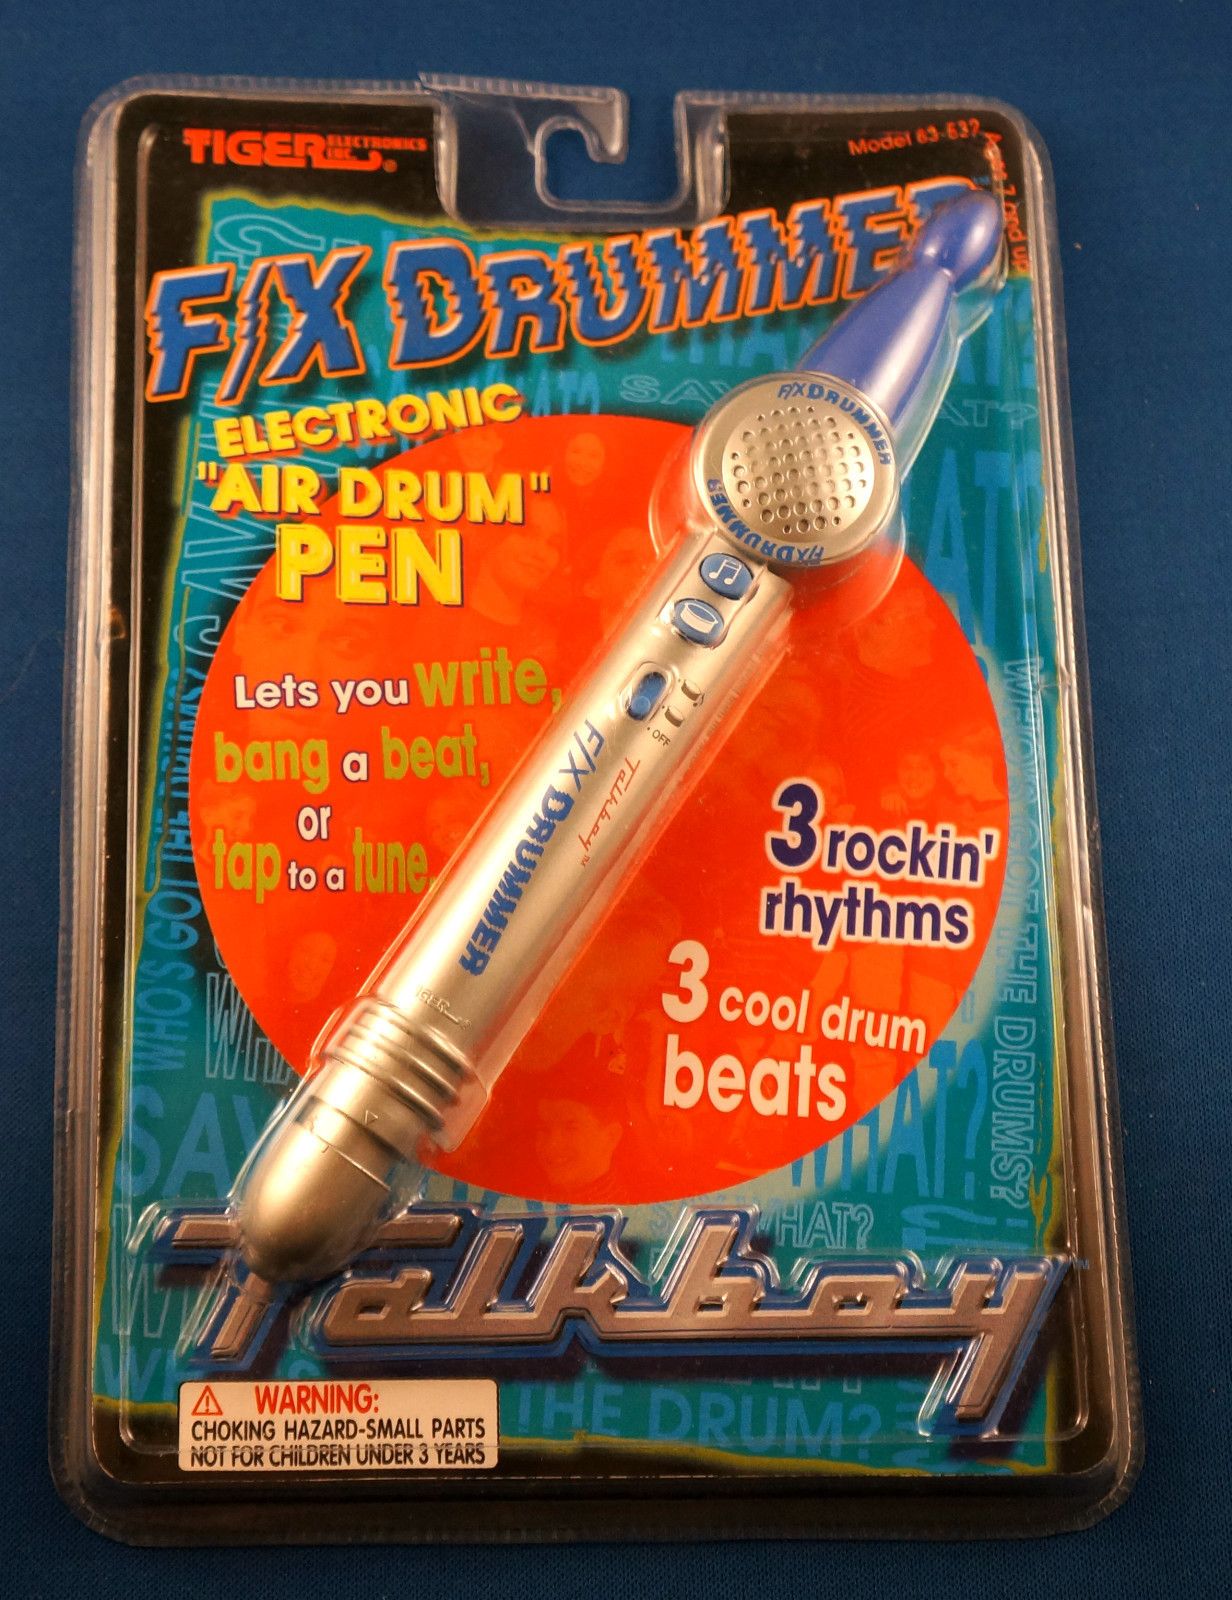  boy air drum pen electronic handheld game by tiger electronics new